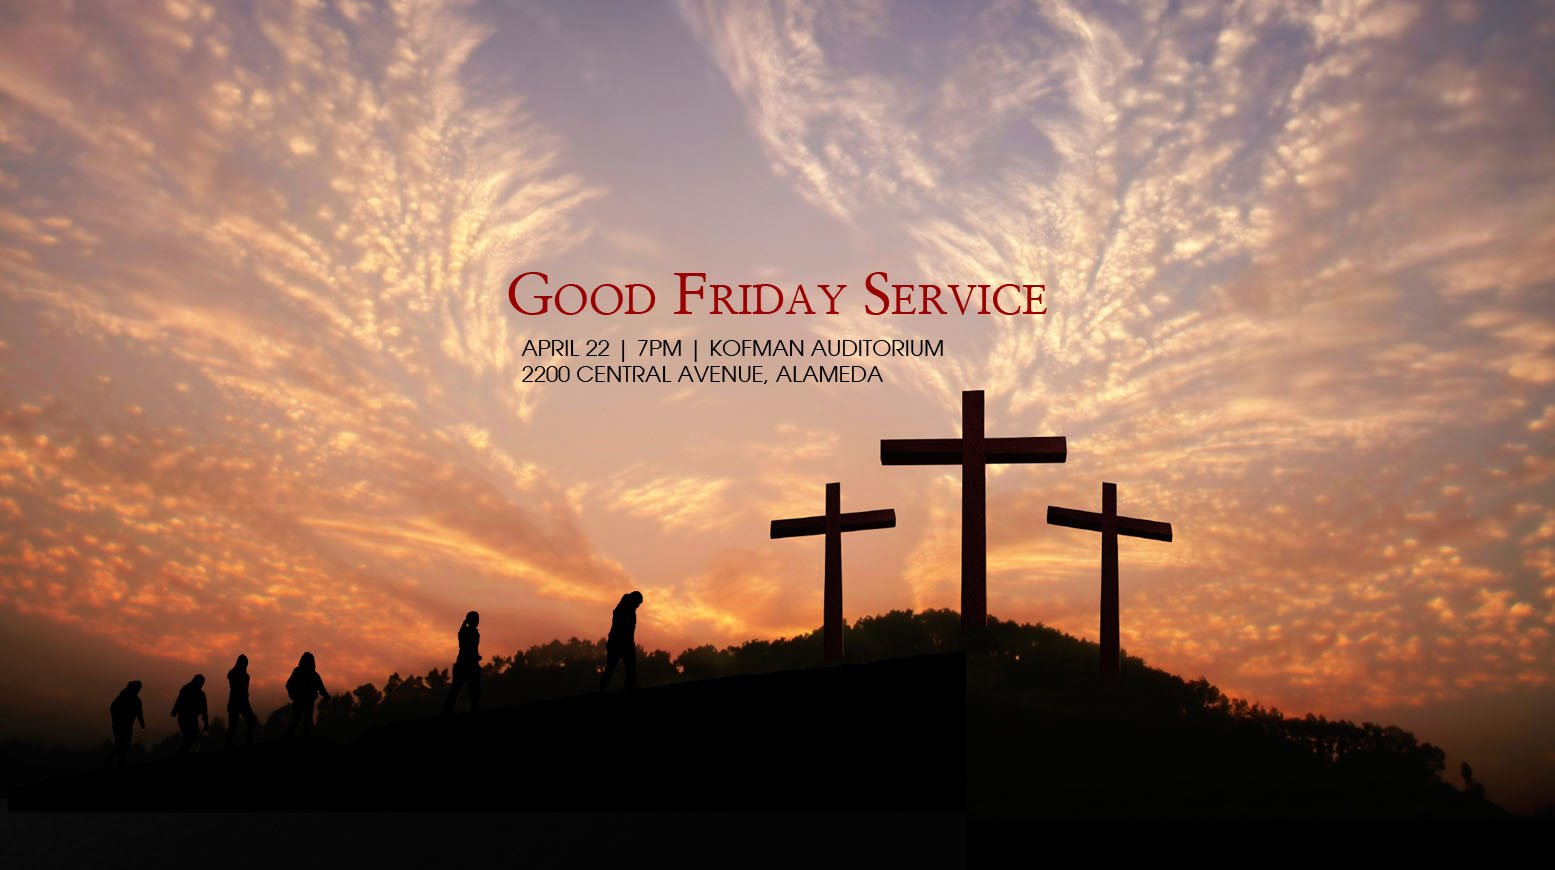 Gallery For Gt Good Friday Wallpaper